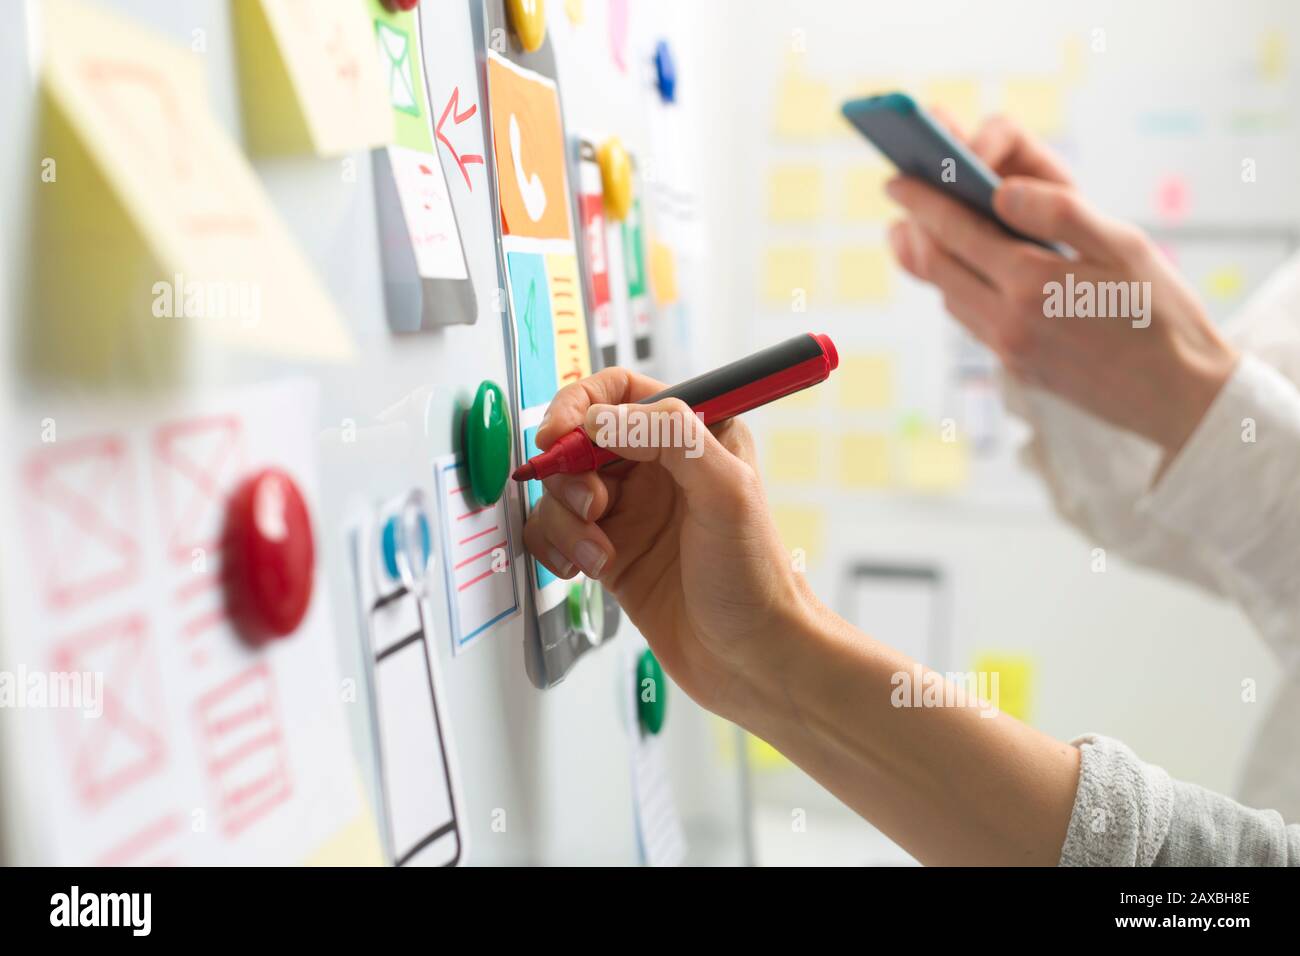 UI website designers are developing a mobile phone application interface. User experience Stock Photo